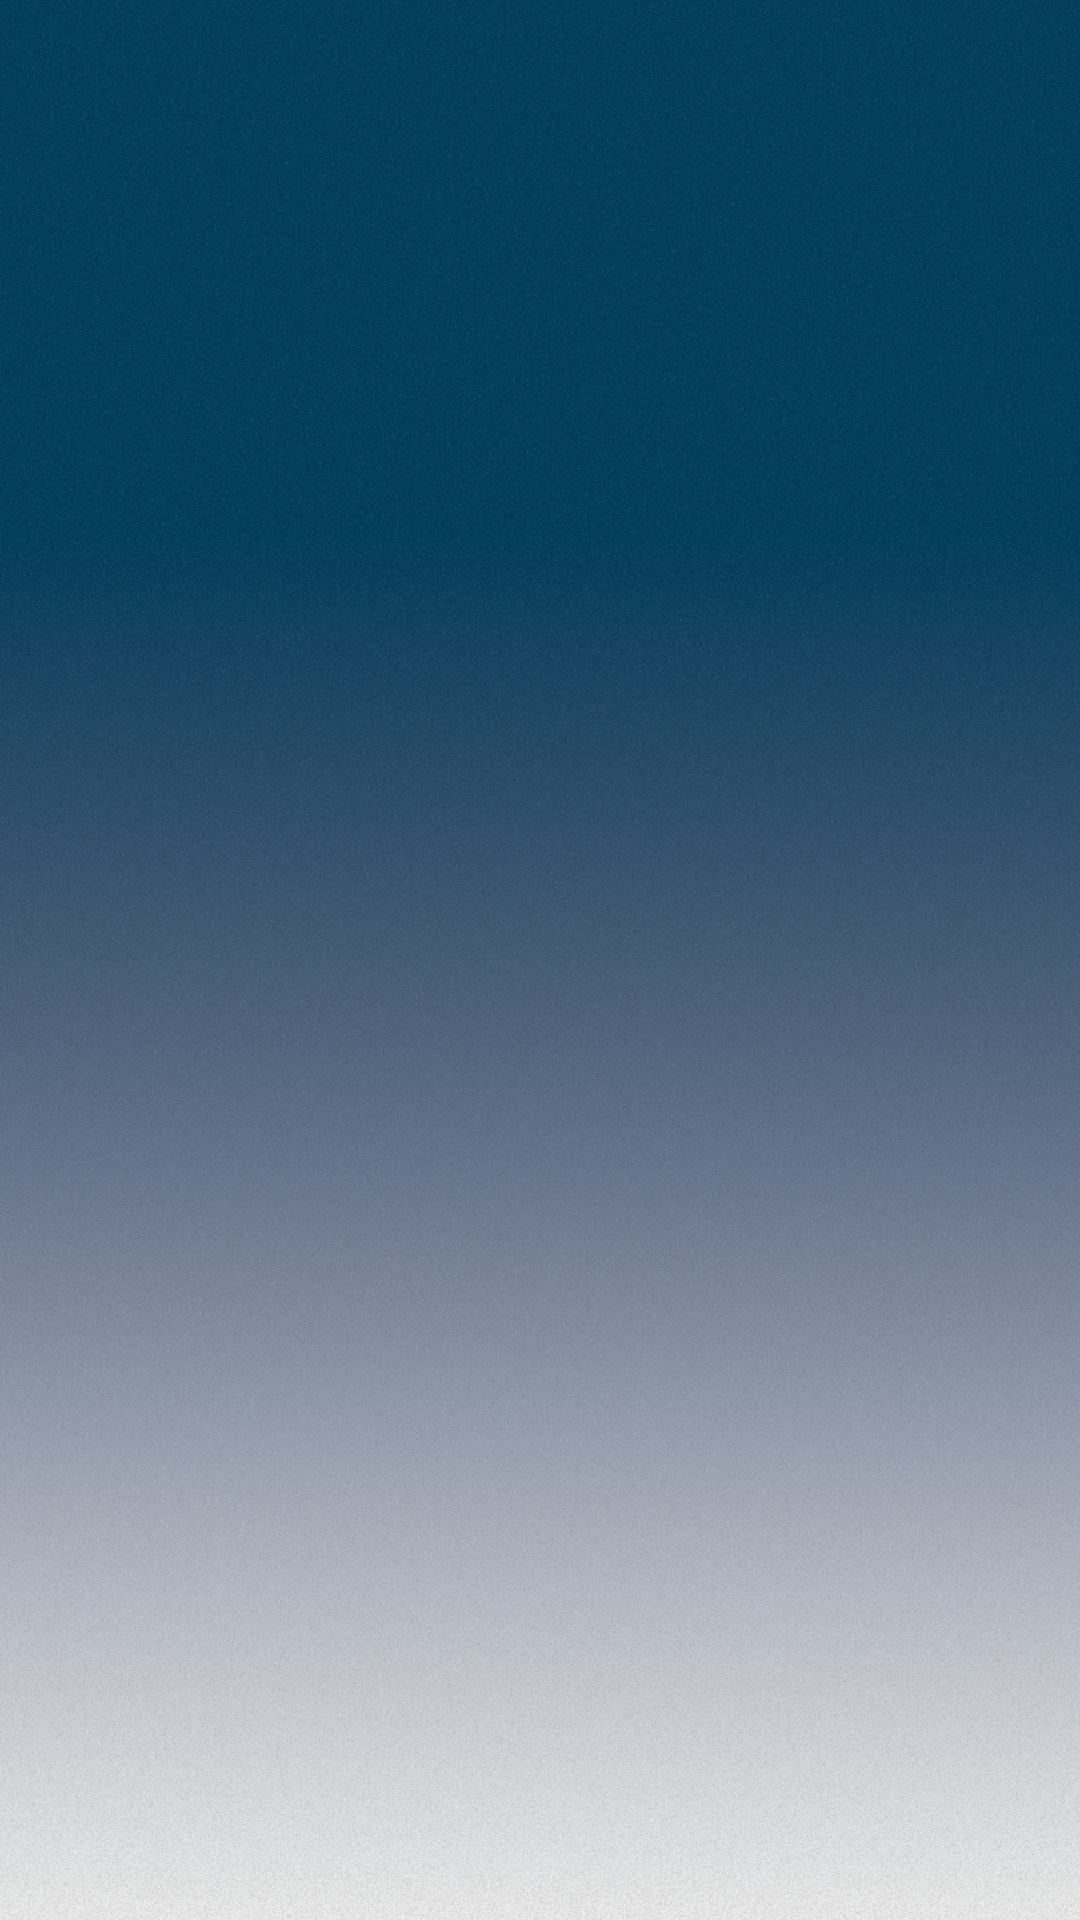 Grey Blue iPhone Wallpapers - Wallpaper Cave